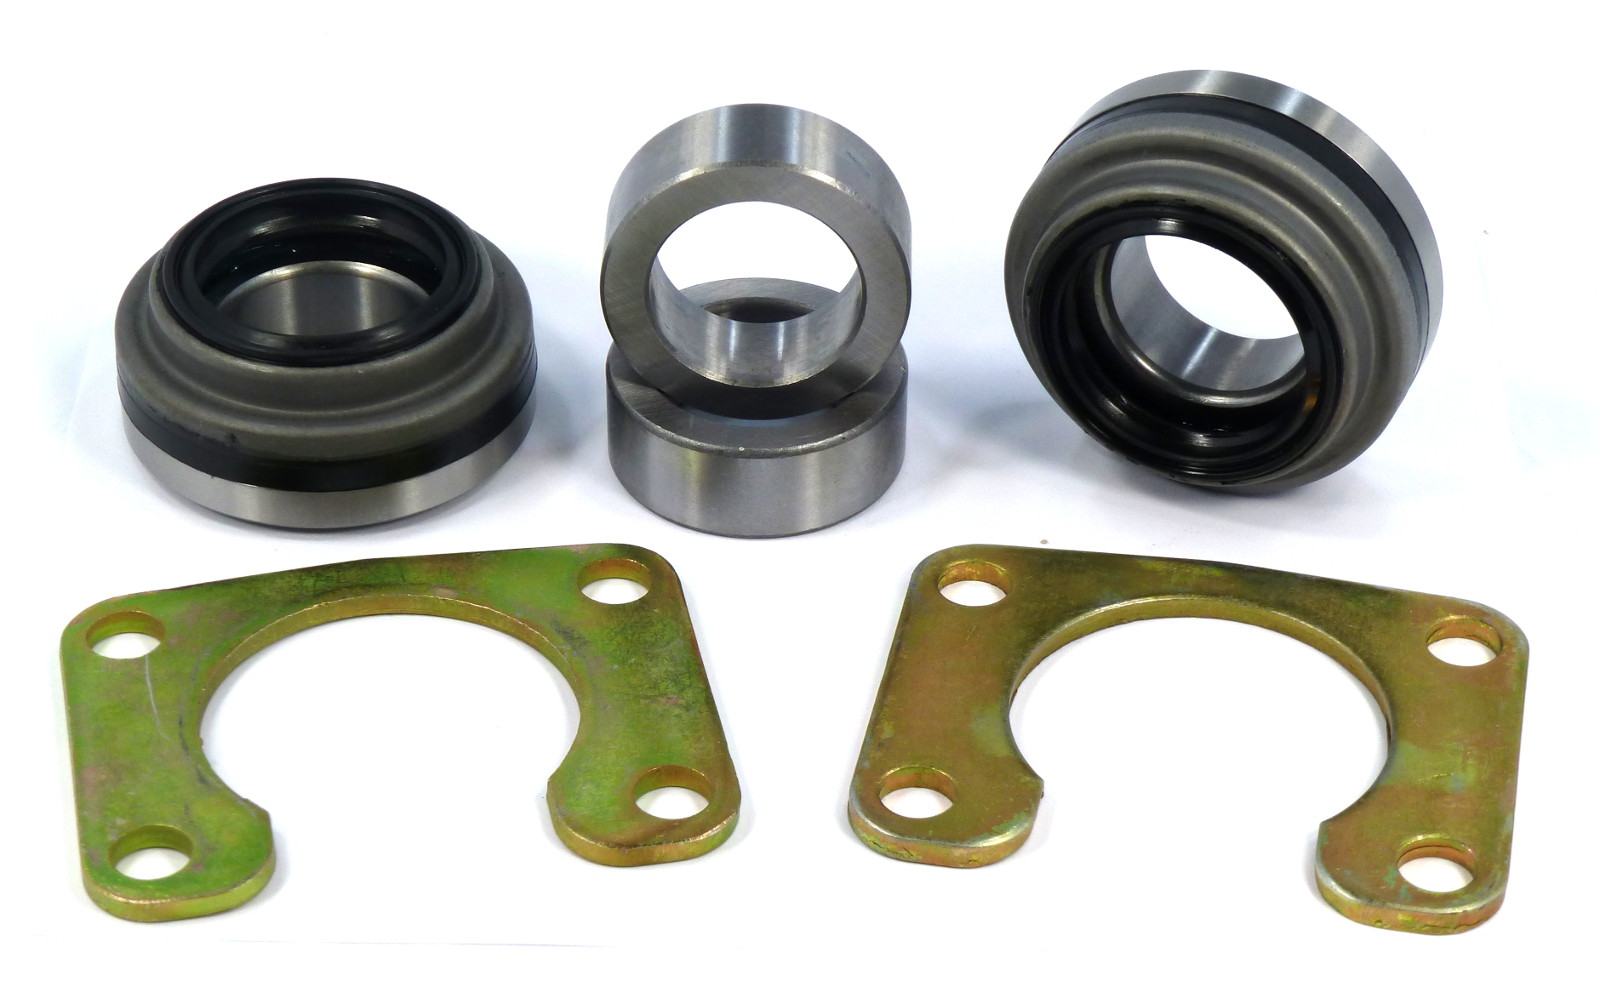 Pair of Small Ford Axle Bearing for Big Axle 2.834" OD x 1.562" ID with O-ring 